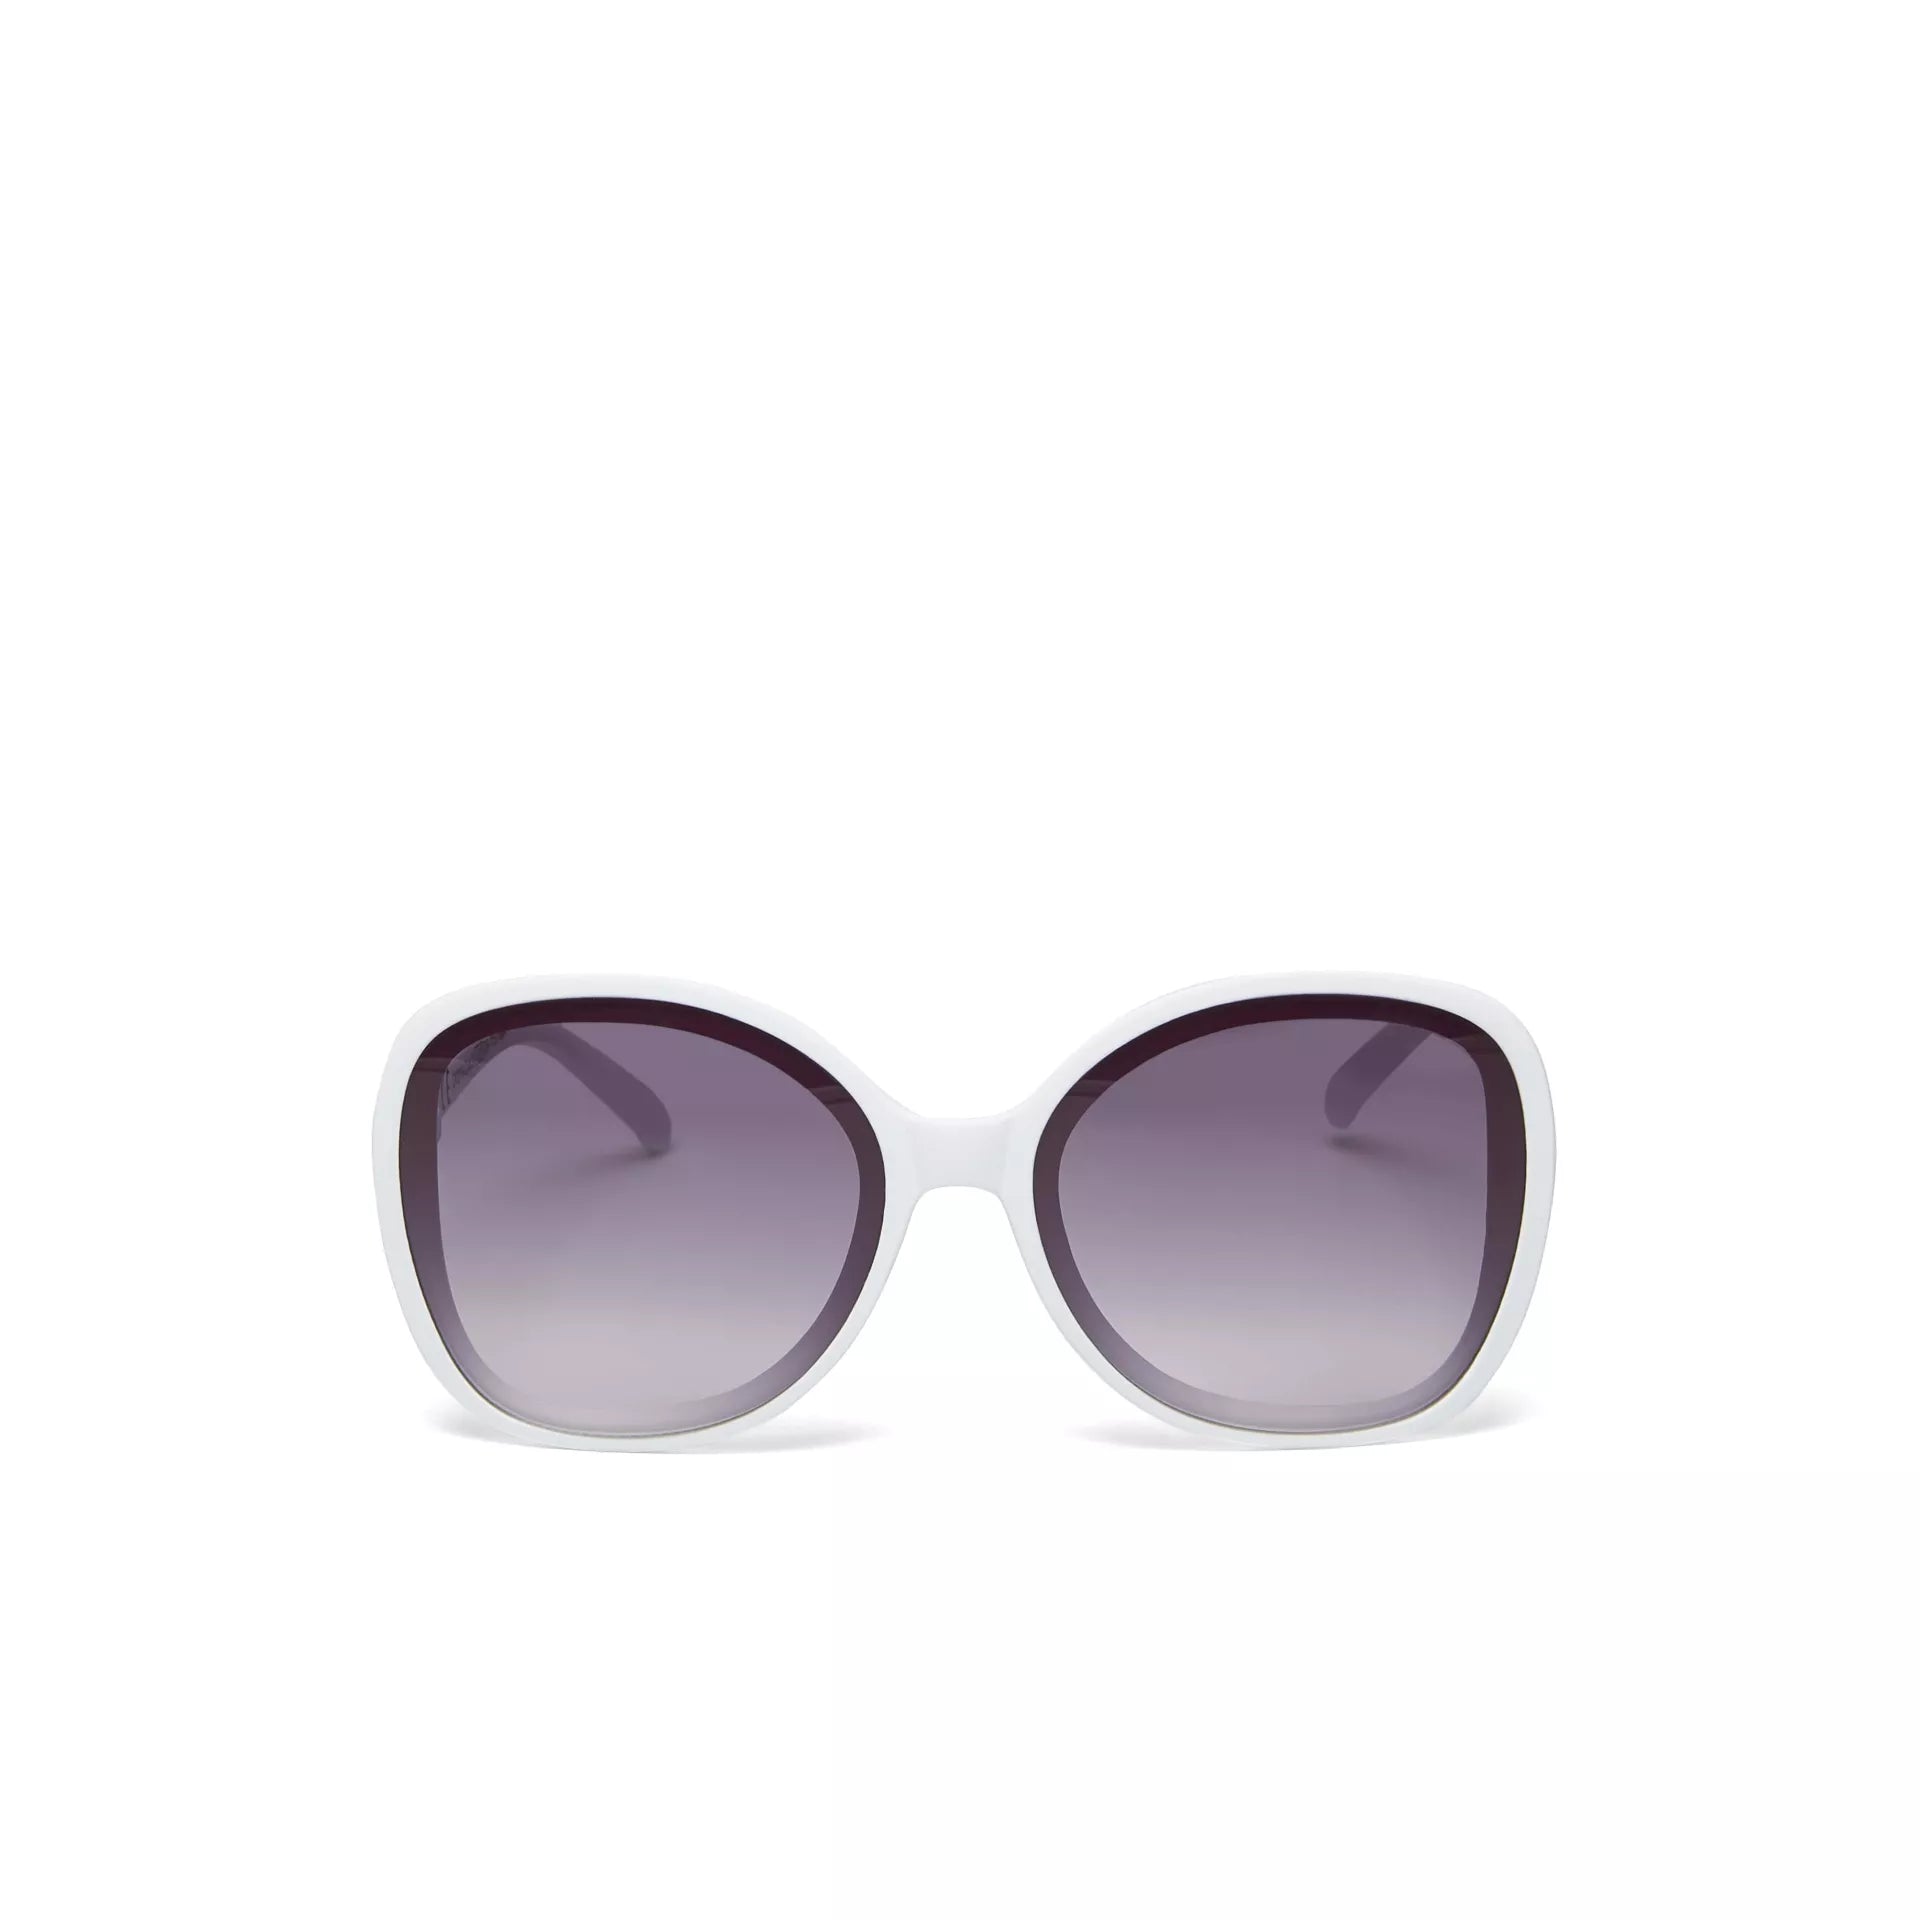 Fabulous Gifts Okkia Sunglasses Butterfly Optical White by Weirs of Baggot Street